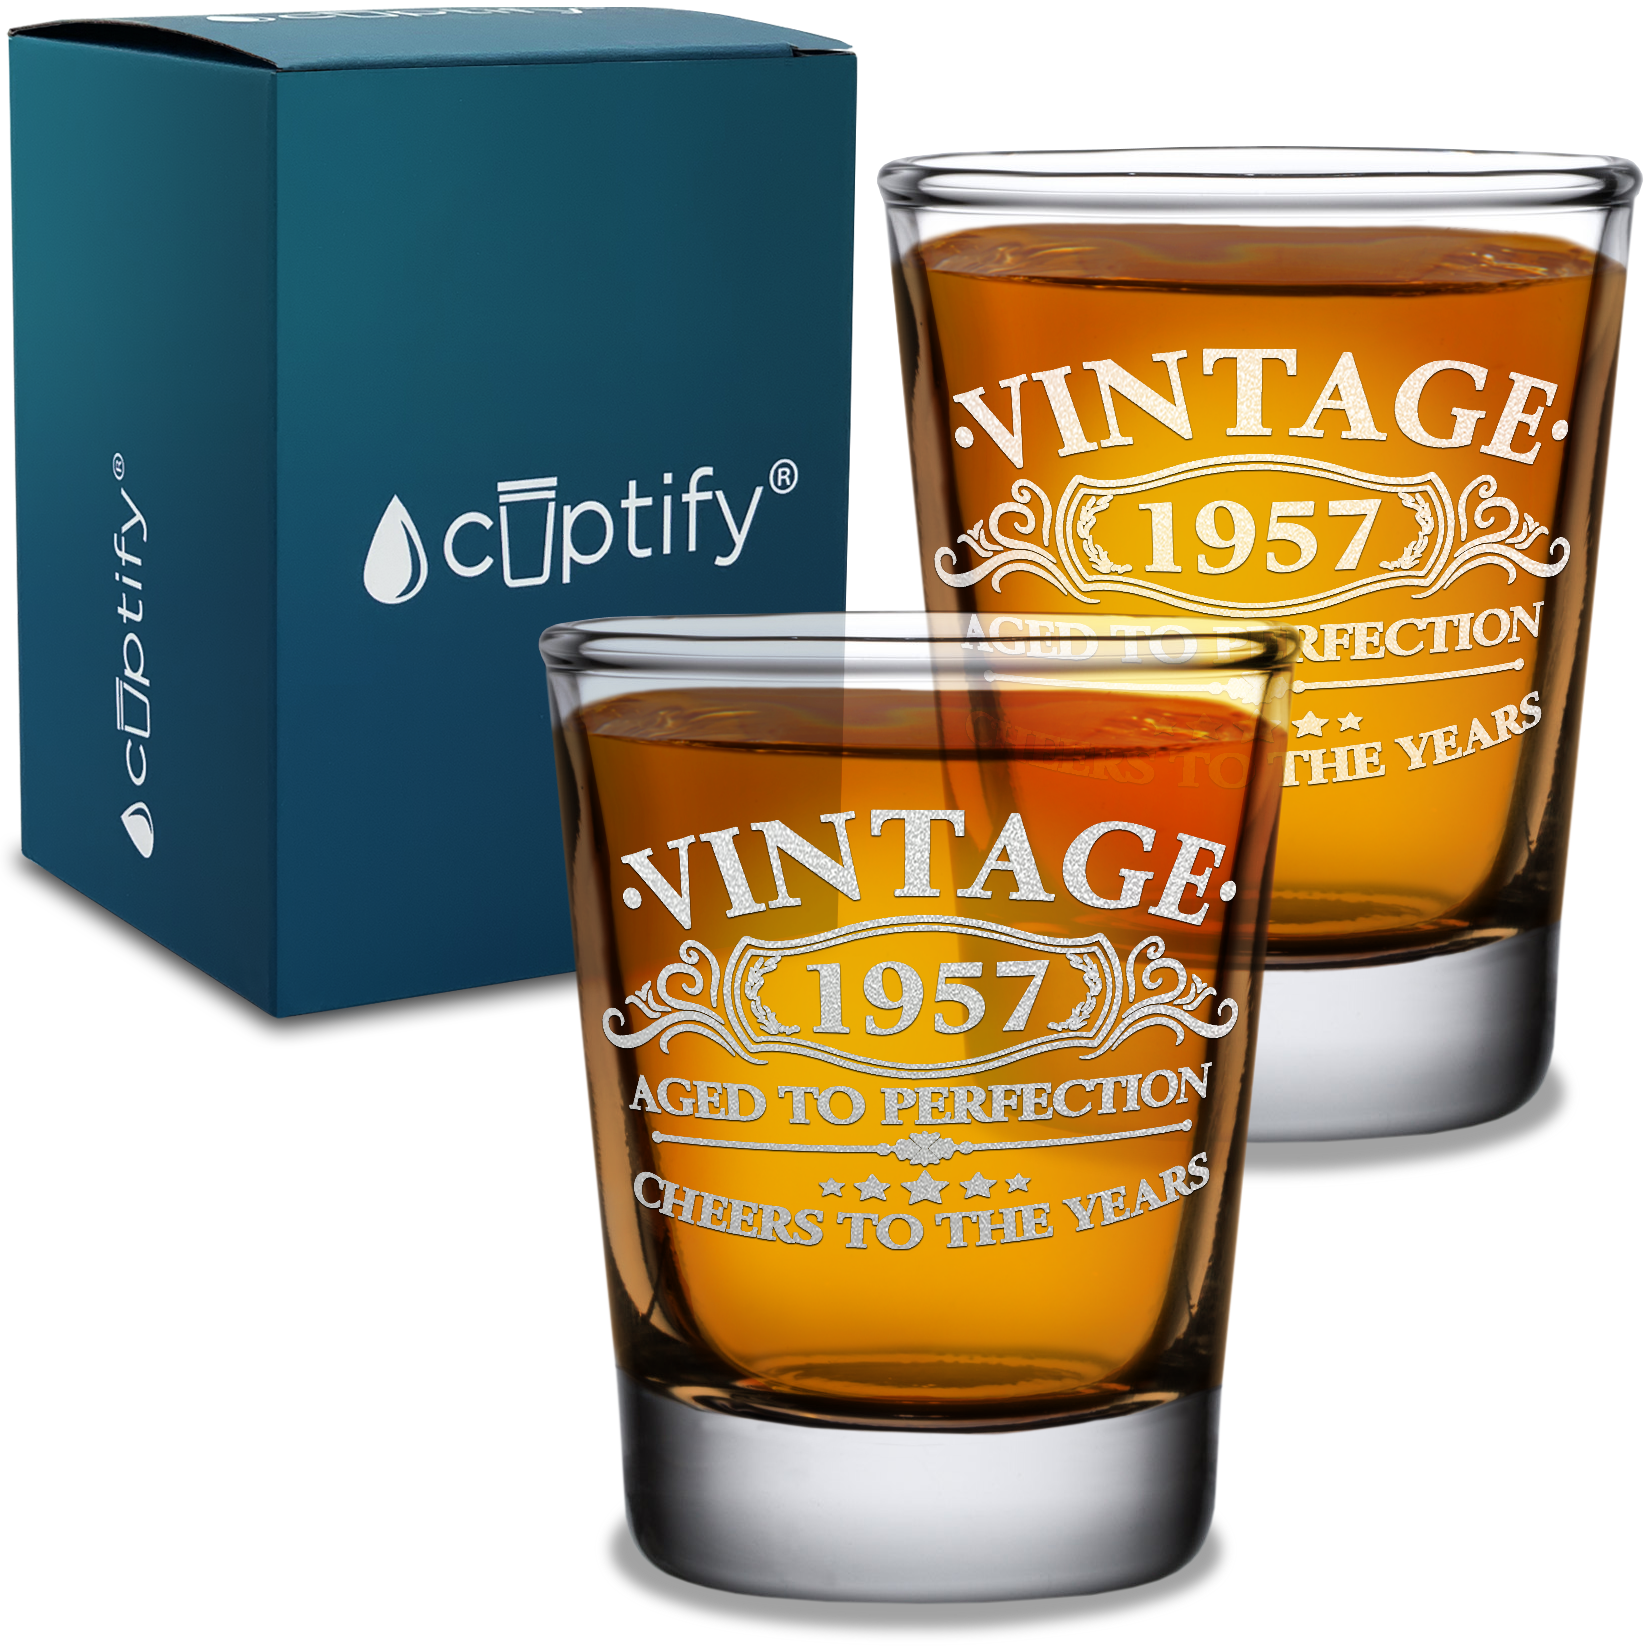 64th Birthday Gift Vintage Aged To Perfection Cheers To 64 Years 1957 Laser Engraved on 2oz Shot Glasses - Set of 2